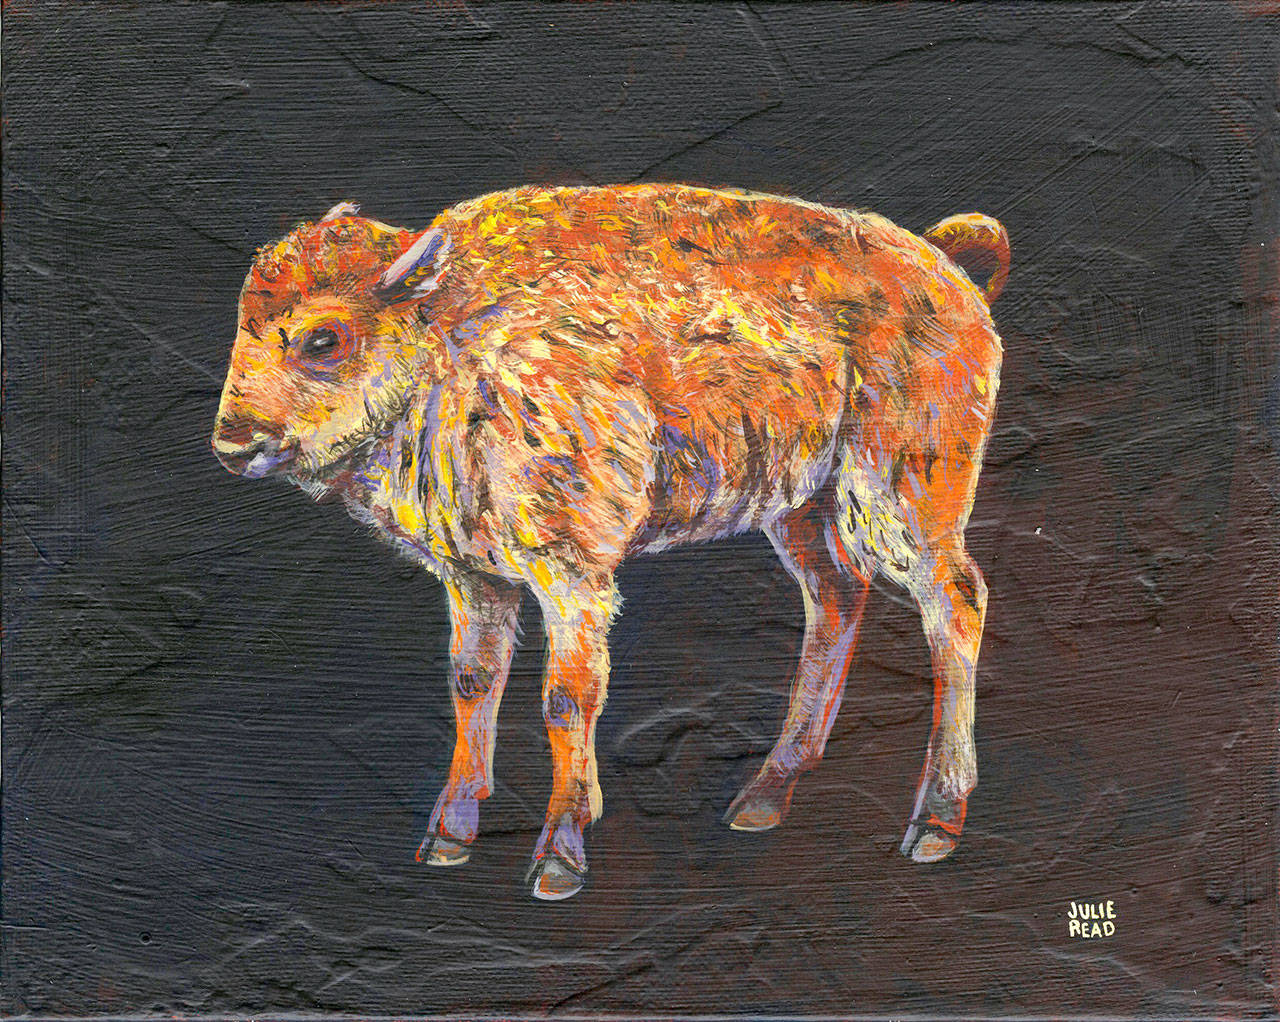 “Tatanka the buffalo,” a painting by Julie Read will be displayed as part of an exhibit Saturday to benefit Center Valley Animal Rescue in Quilcene.